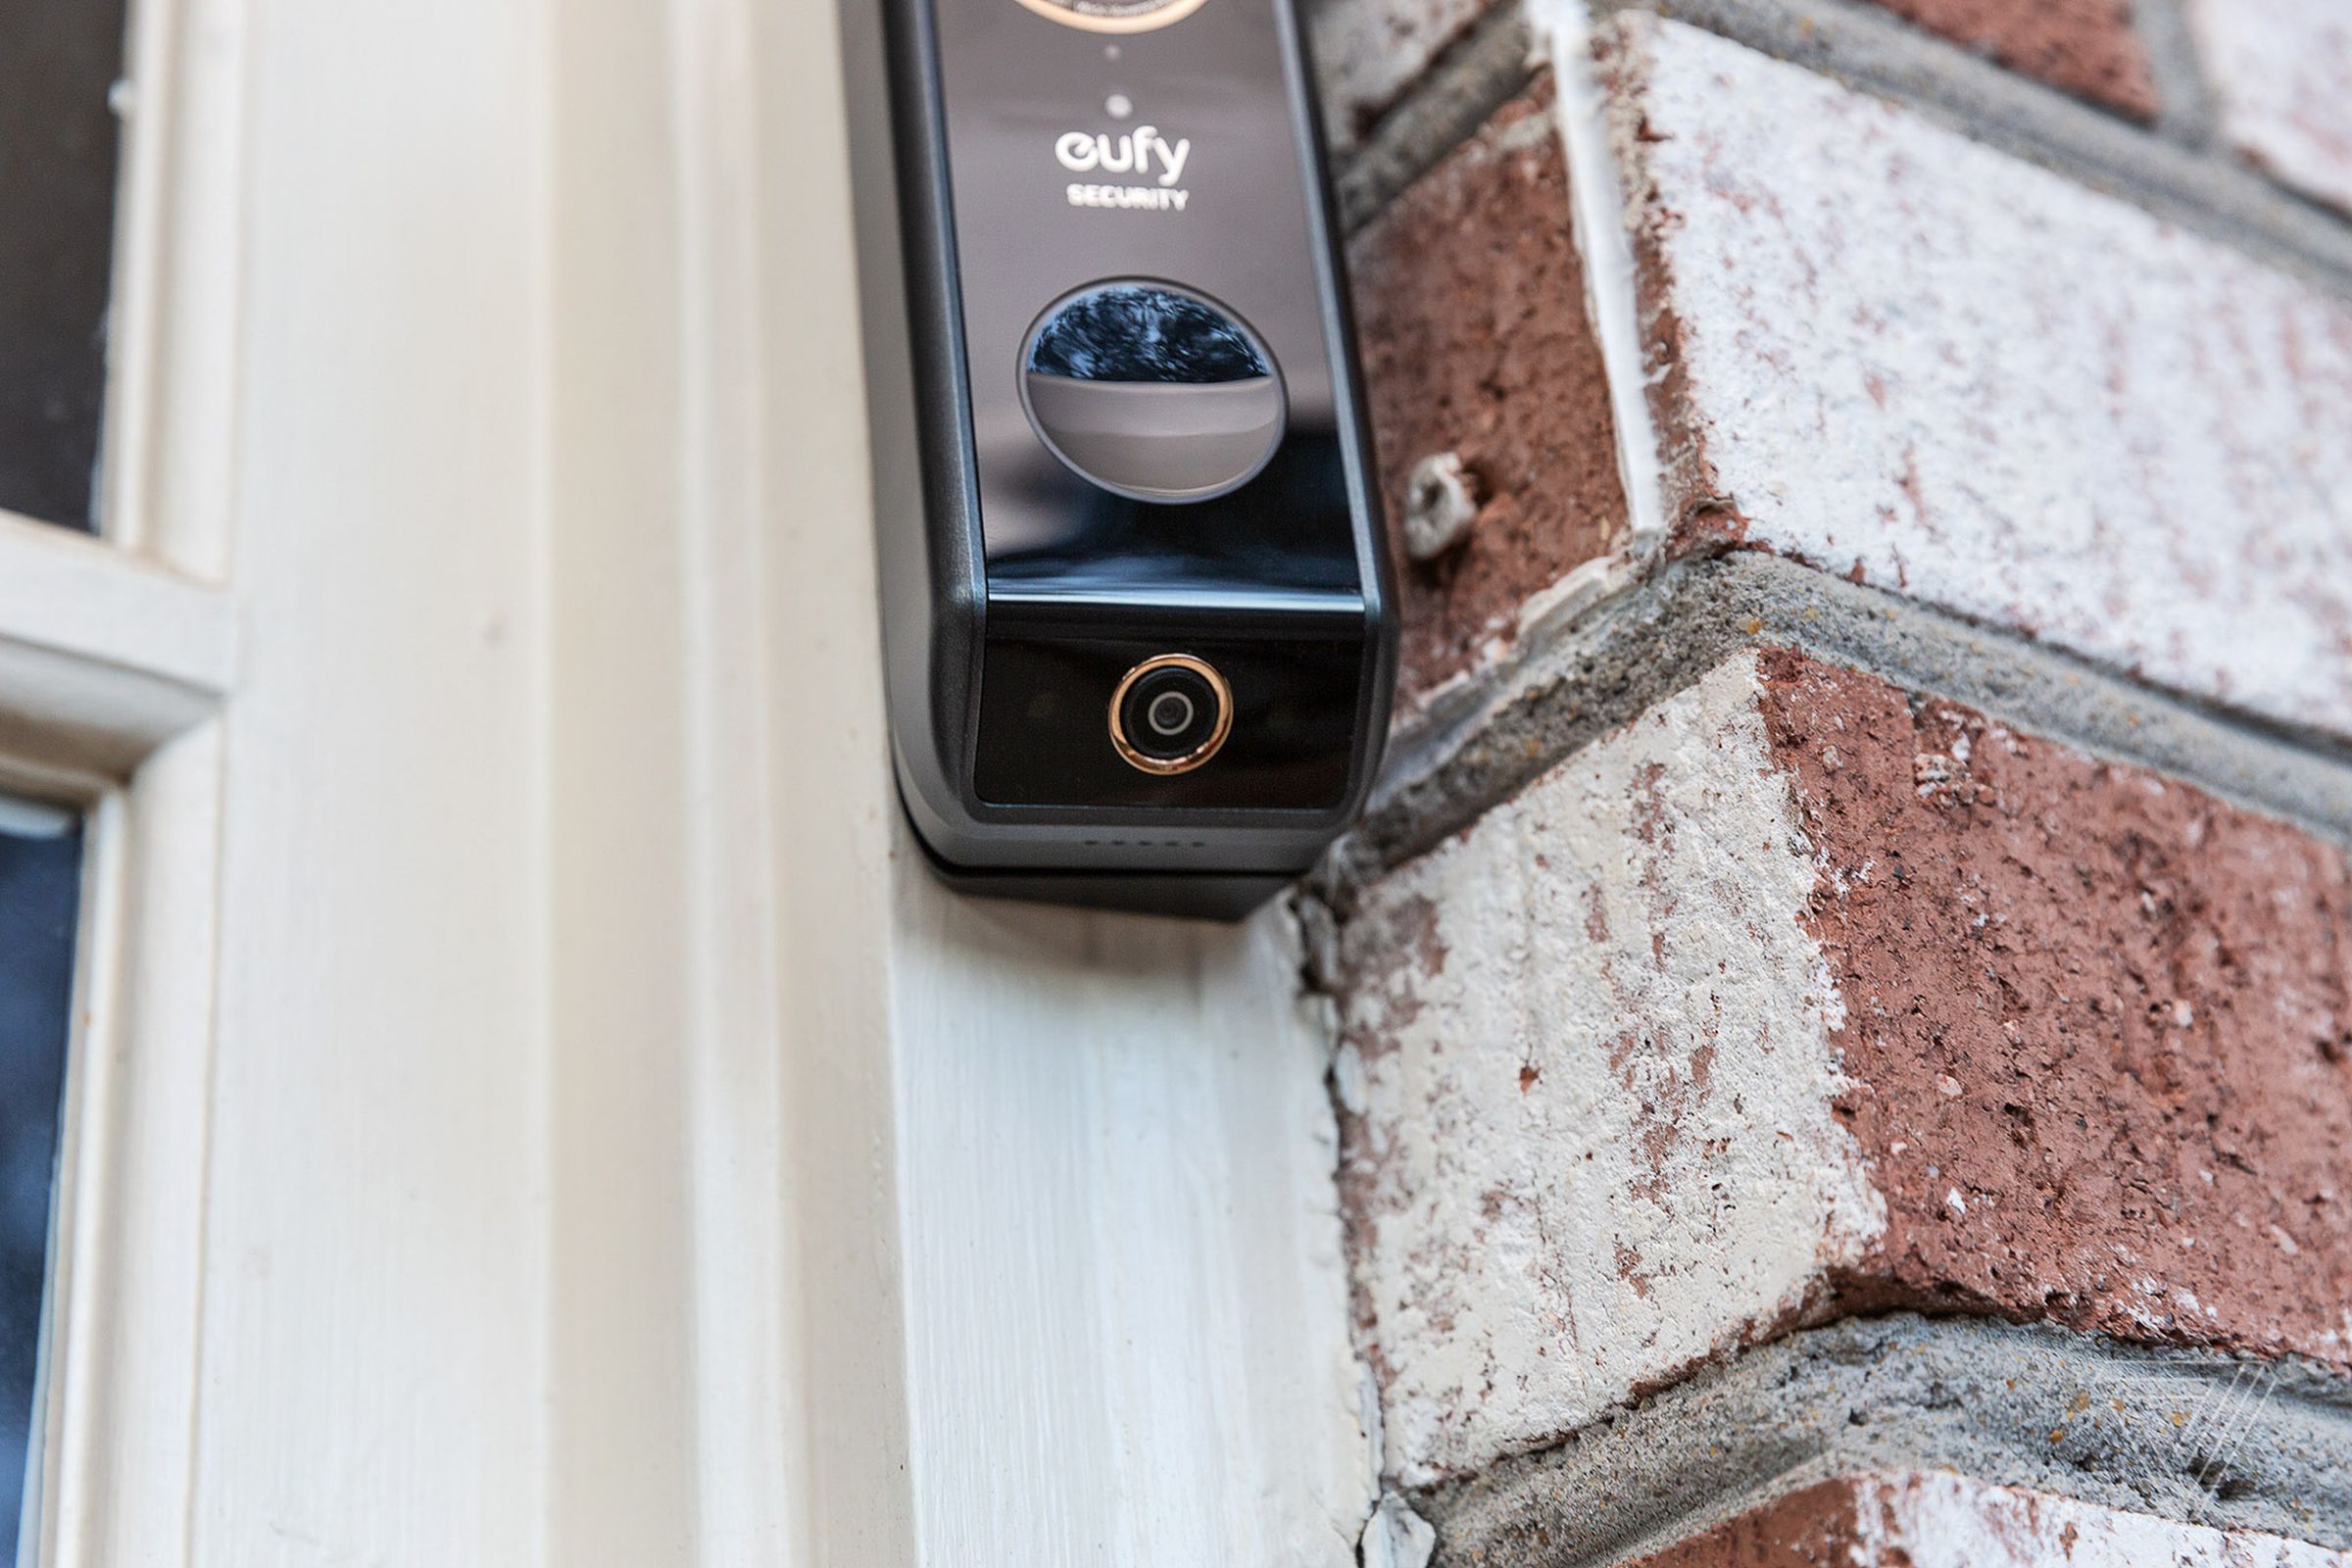 The Eufy’s “package” cam has LED lights and 1080p video.